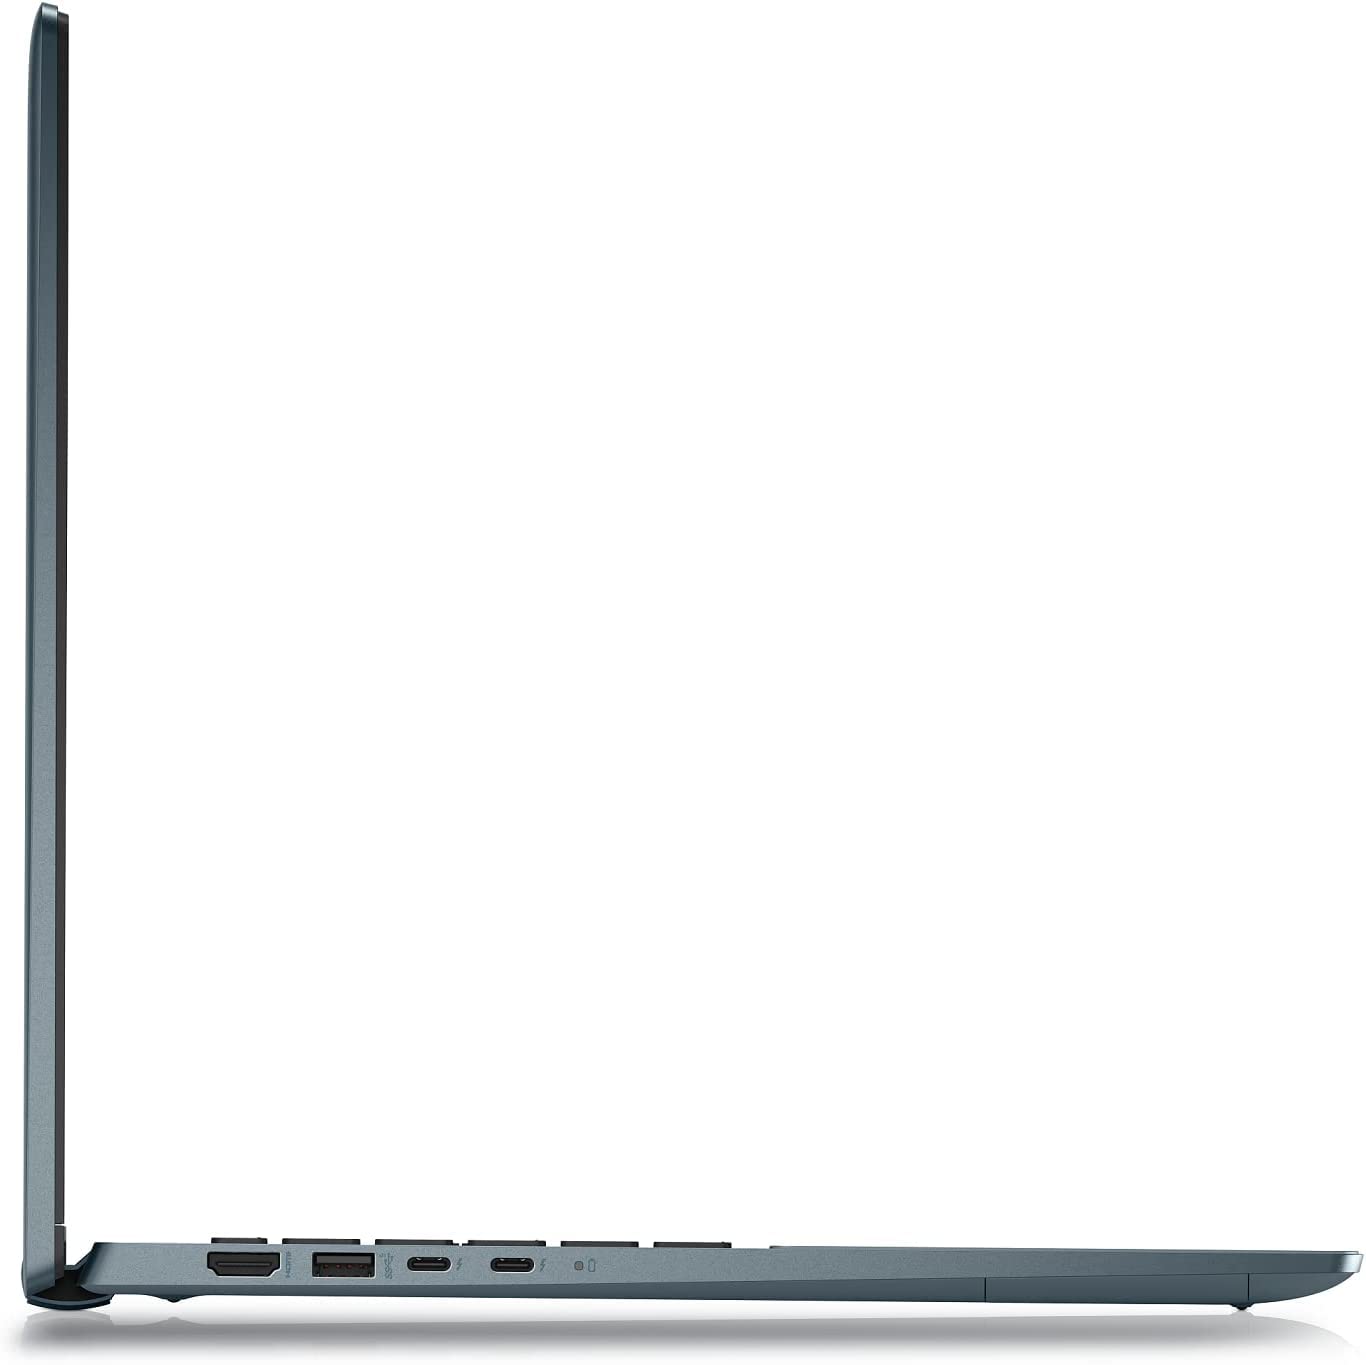 New Inspiron 16 2-in-1 i7620 16.0